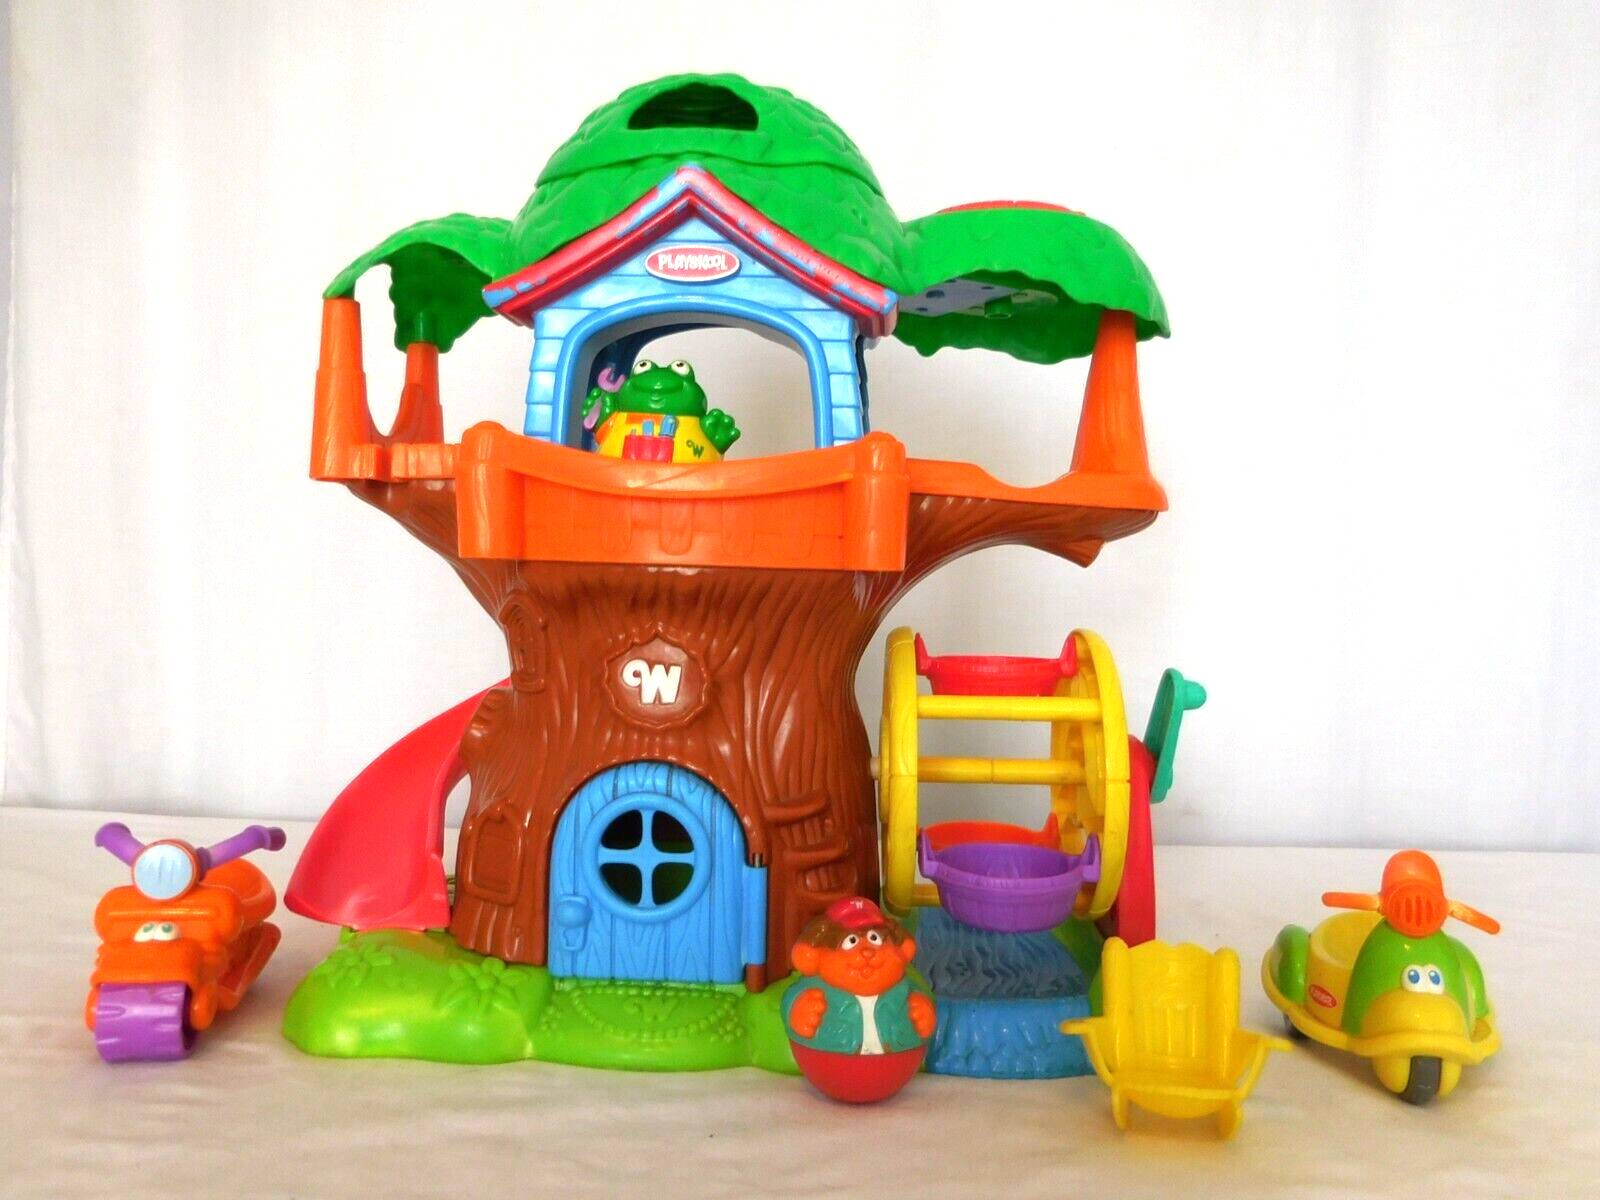 Weebles Wobble Musical Treehouse + Frog Dog Chair Scooters + Weeble  Playskool - $35.66